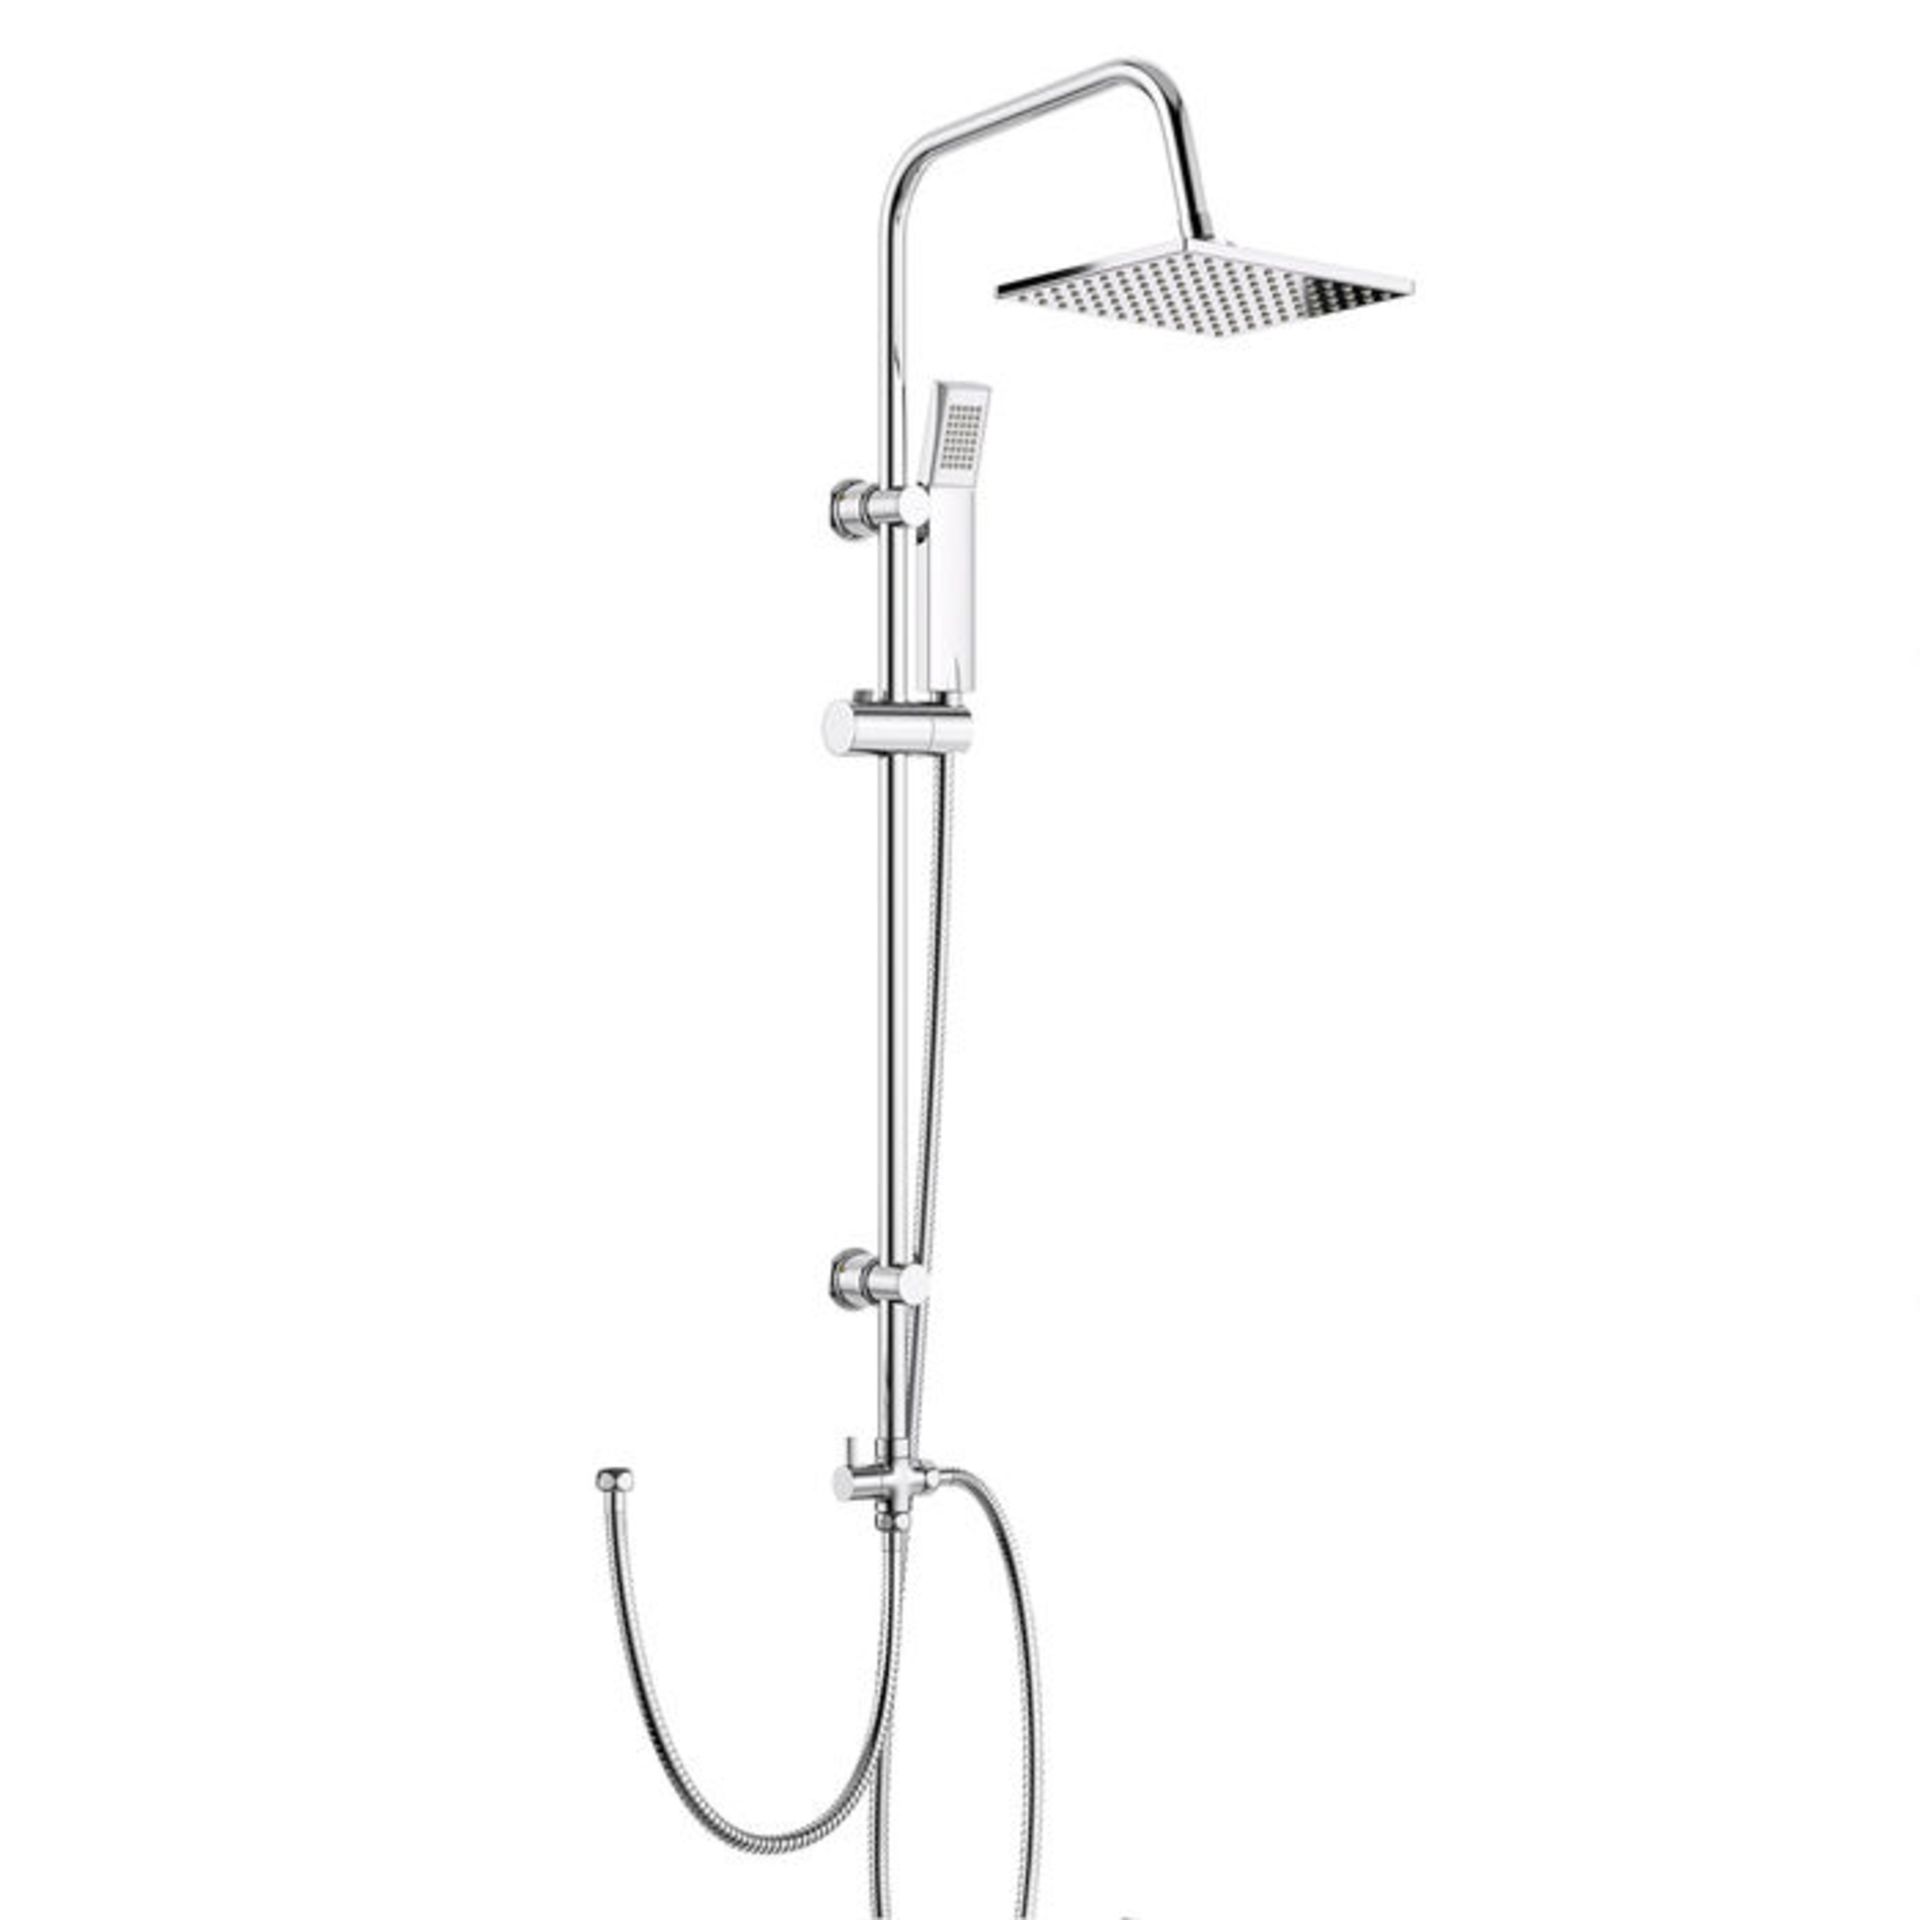 (PA29) 200mm Square Head, Riser Rail & Handheld Kit. Quality stainless steel shower head with Easy - Image 2 of 2